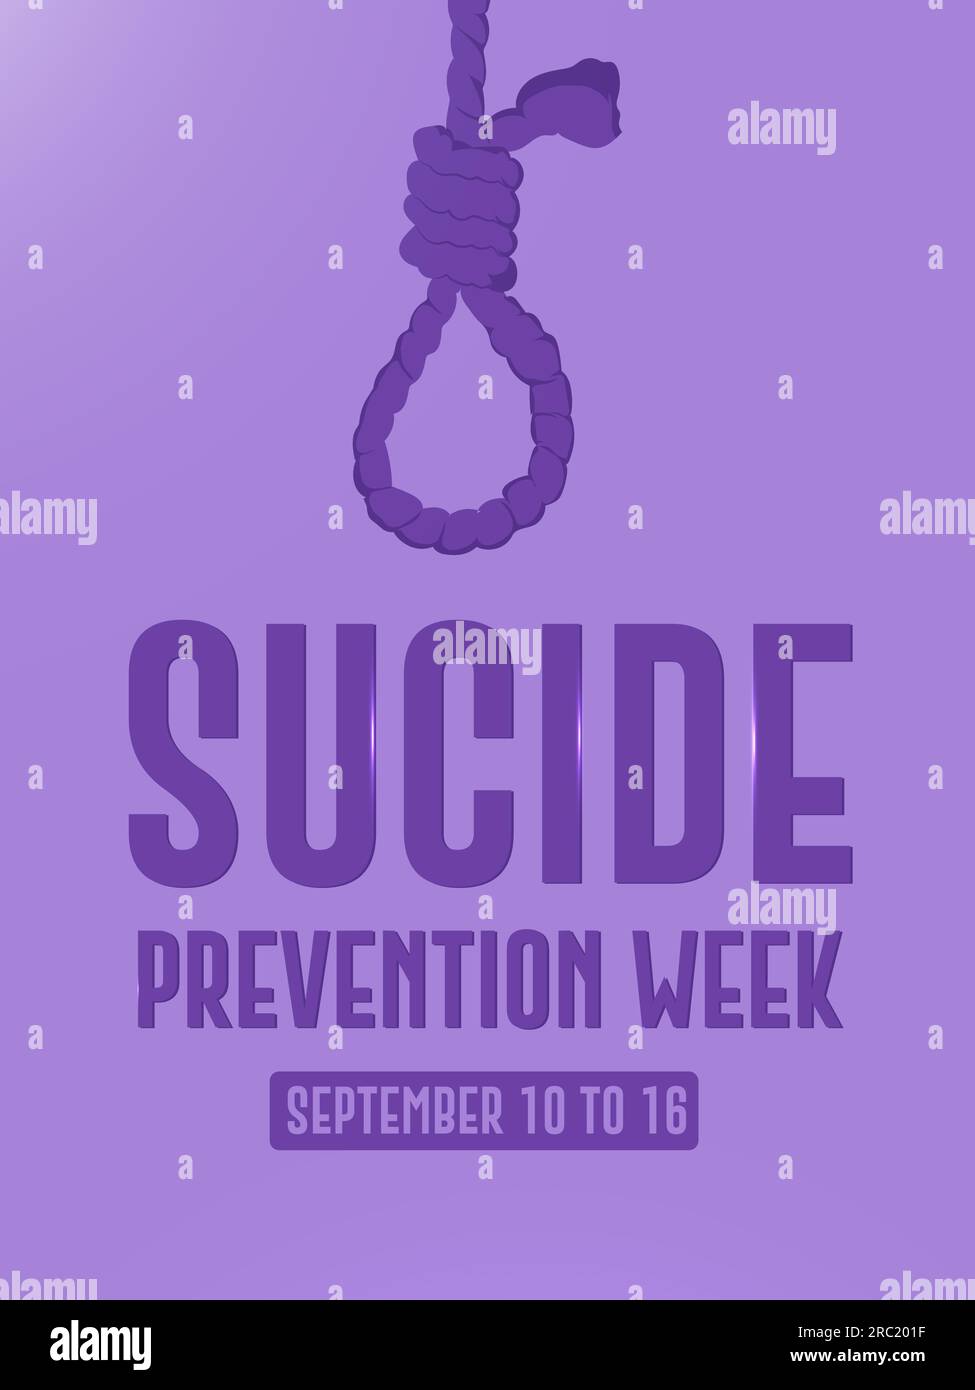 Suicide Prevention Week September 10 to 16 awareness of preventing suicide concept. Vector poster design illustration. Stock Vector